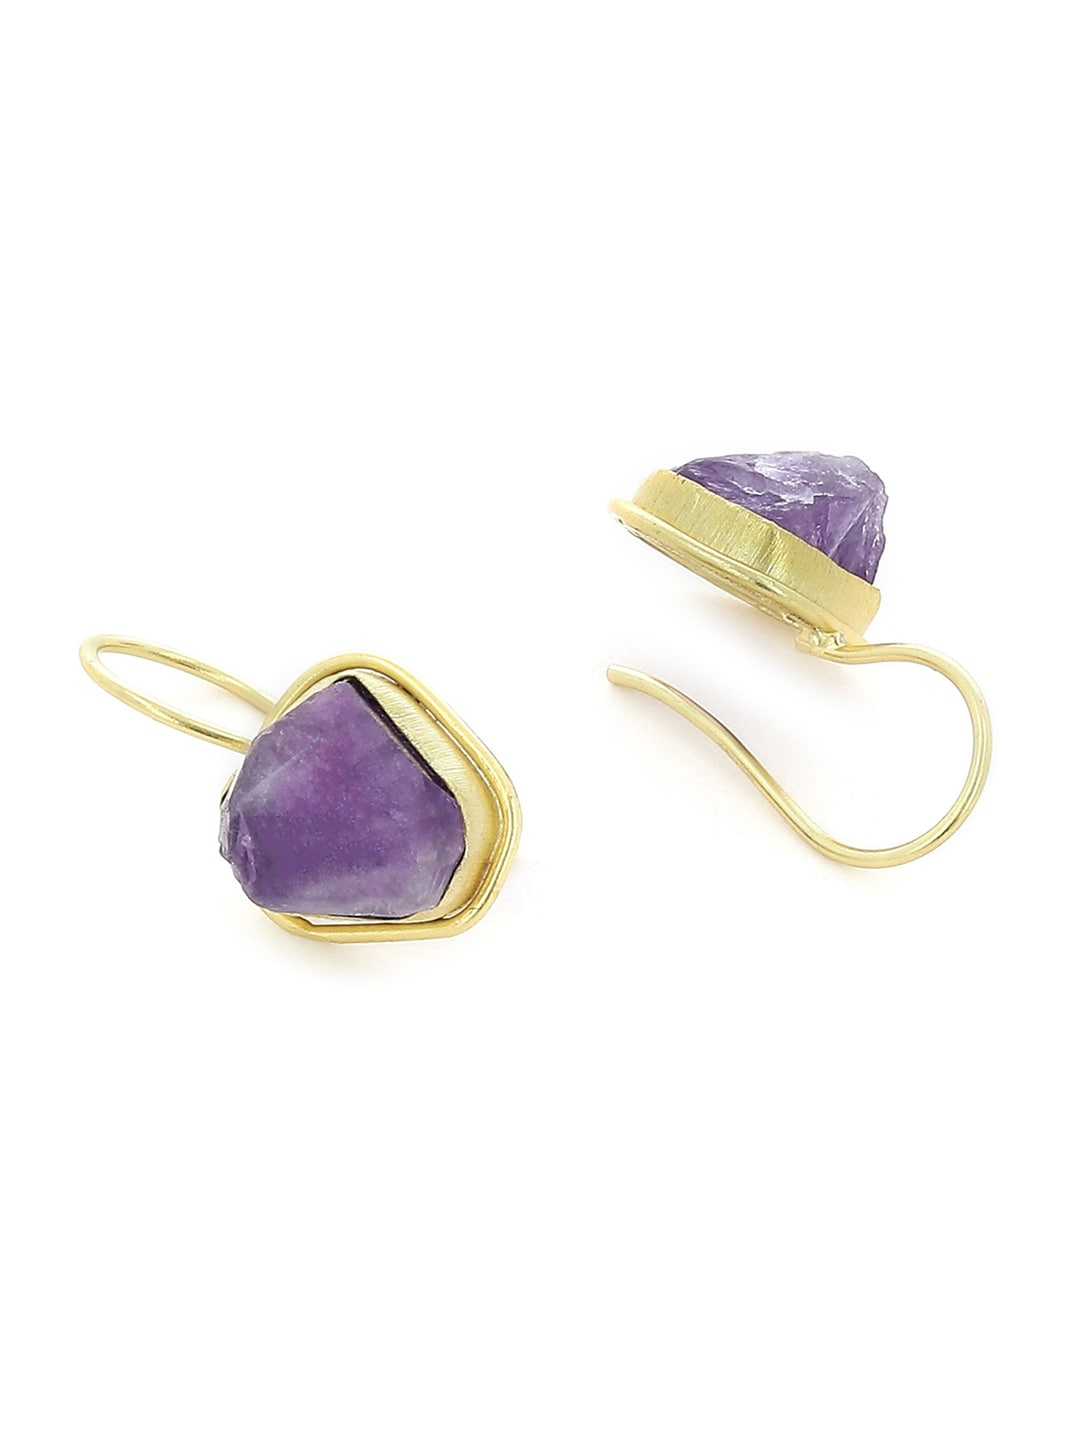 EL REGALO Handcrafted Natural Amethyst Stone Gold Plated Brass Hook Abstract Earrings